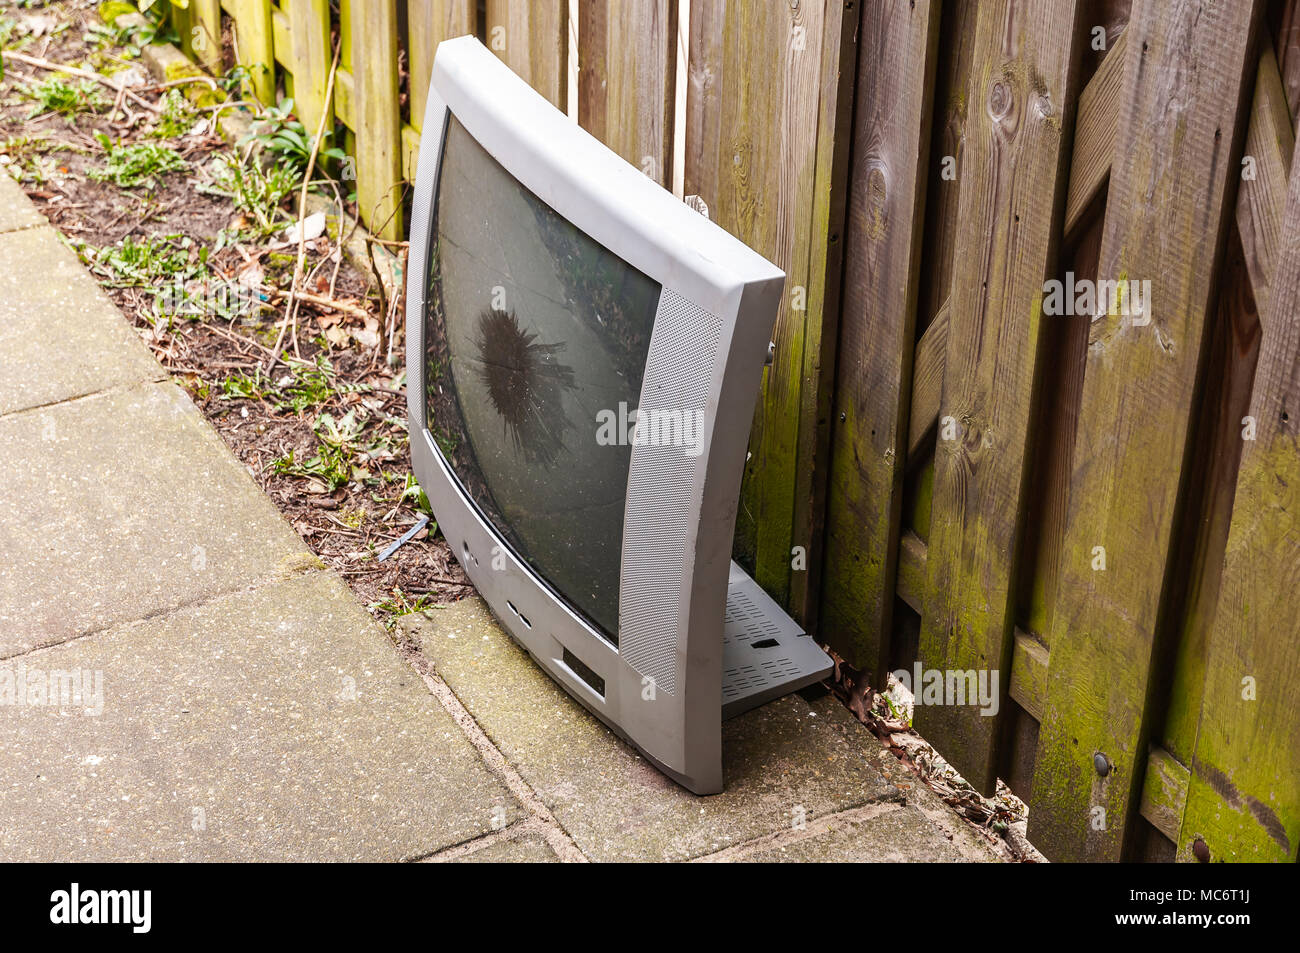 broken TV placed against a wooden fence Stock Photo